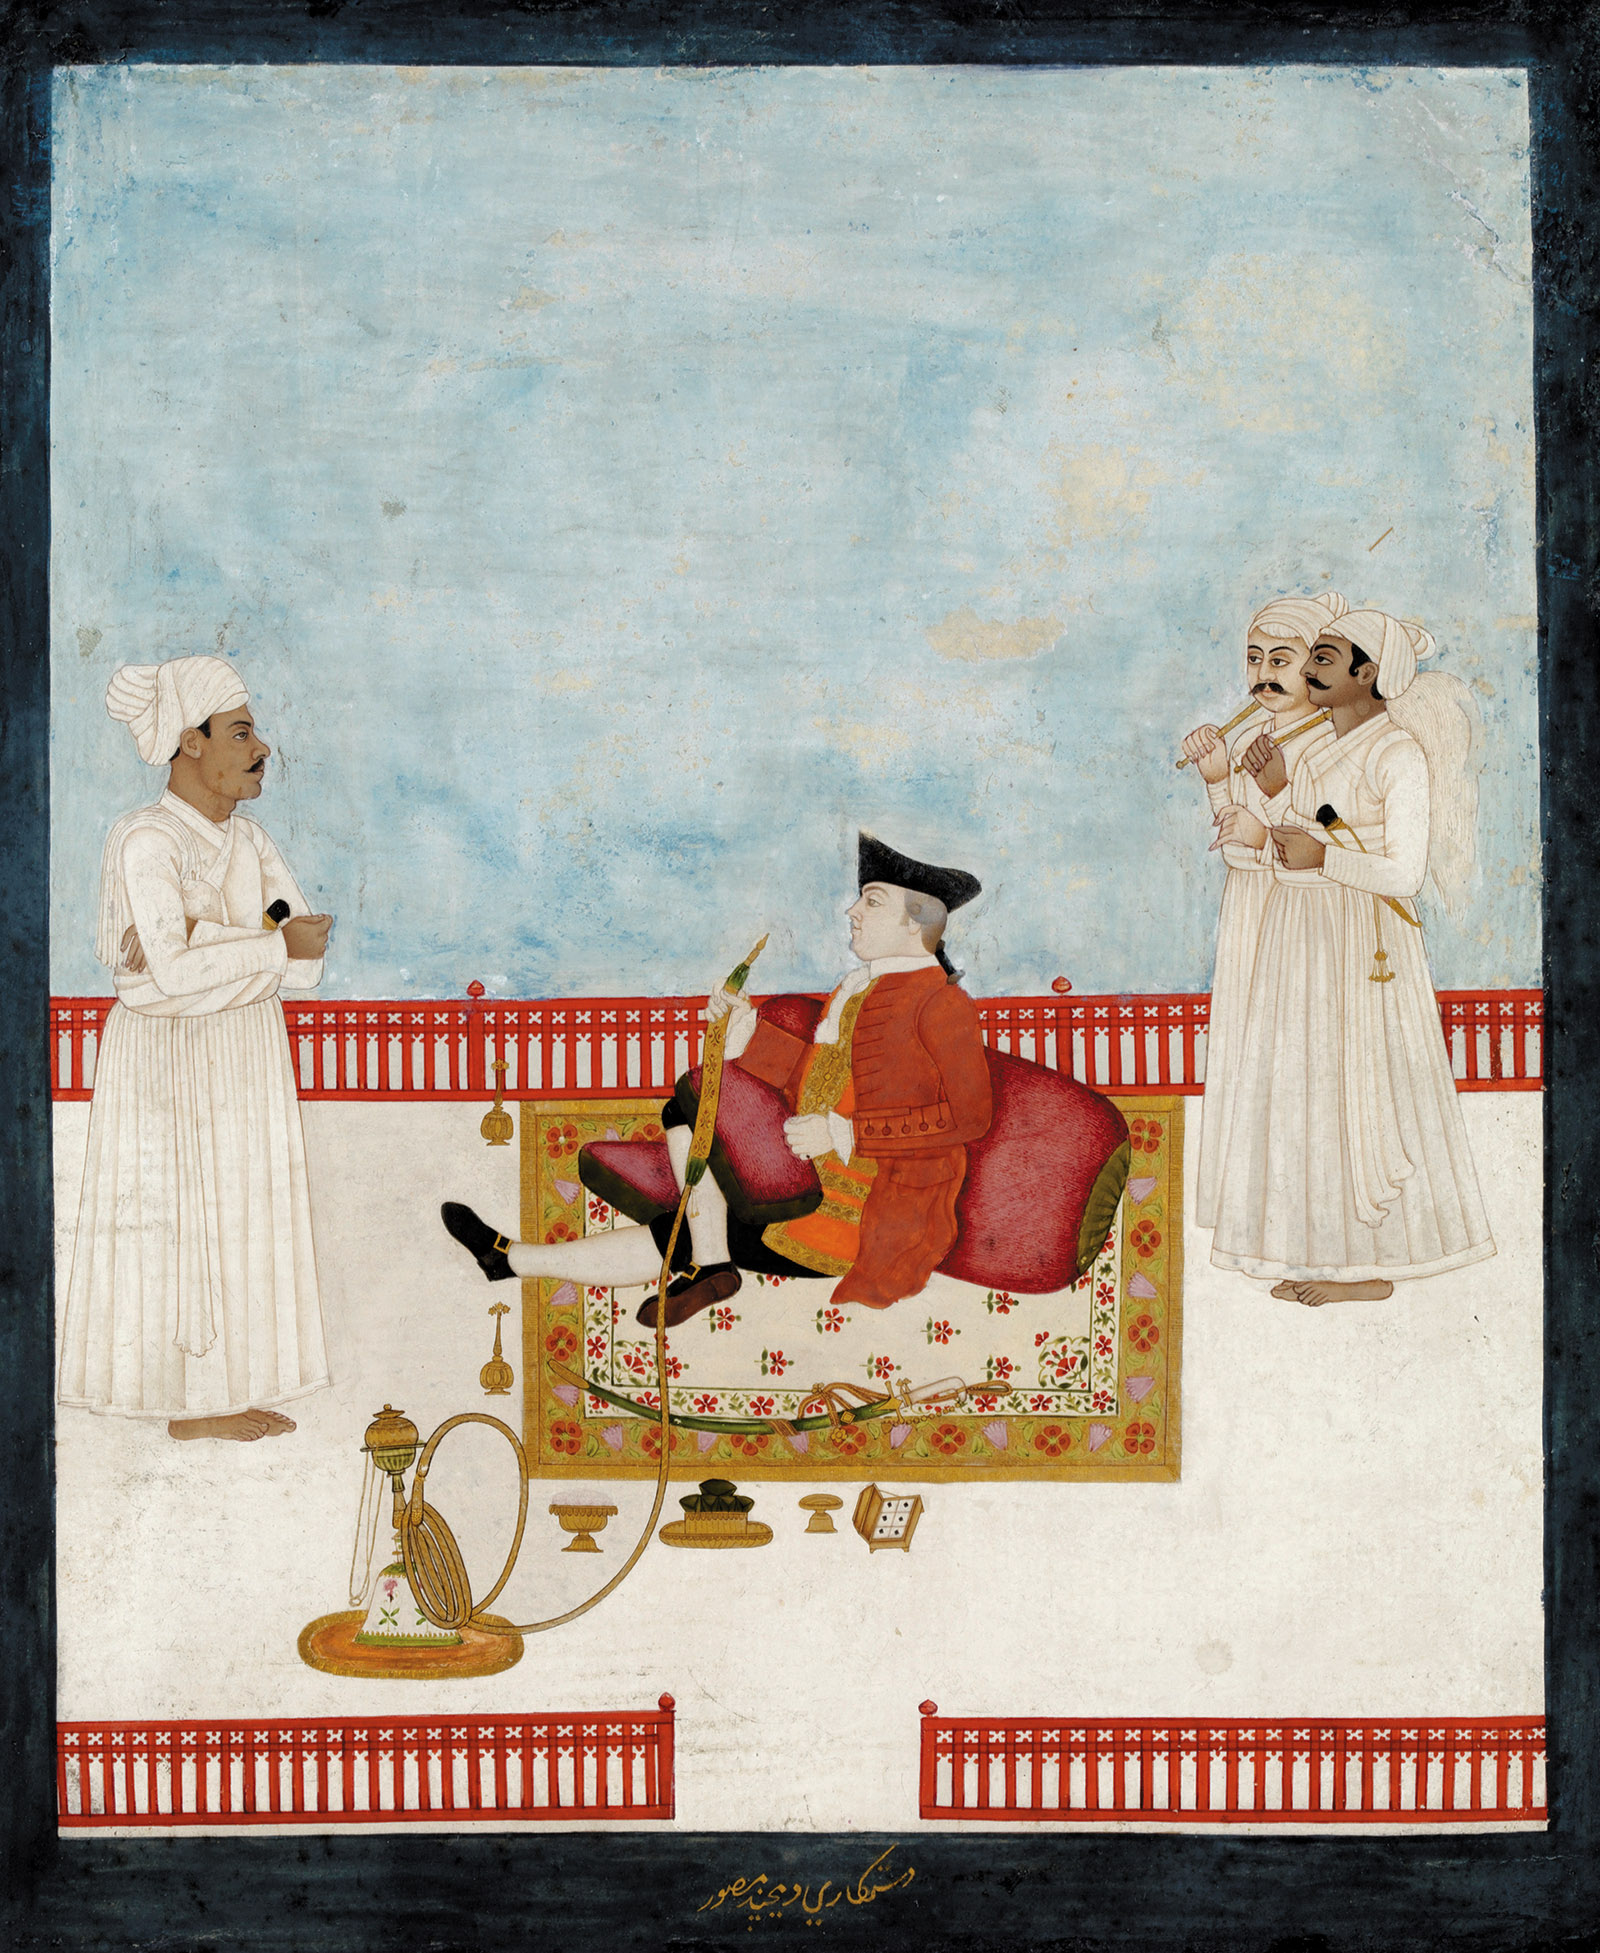 An East India Company official with attendants; painting by Dip Chand